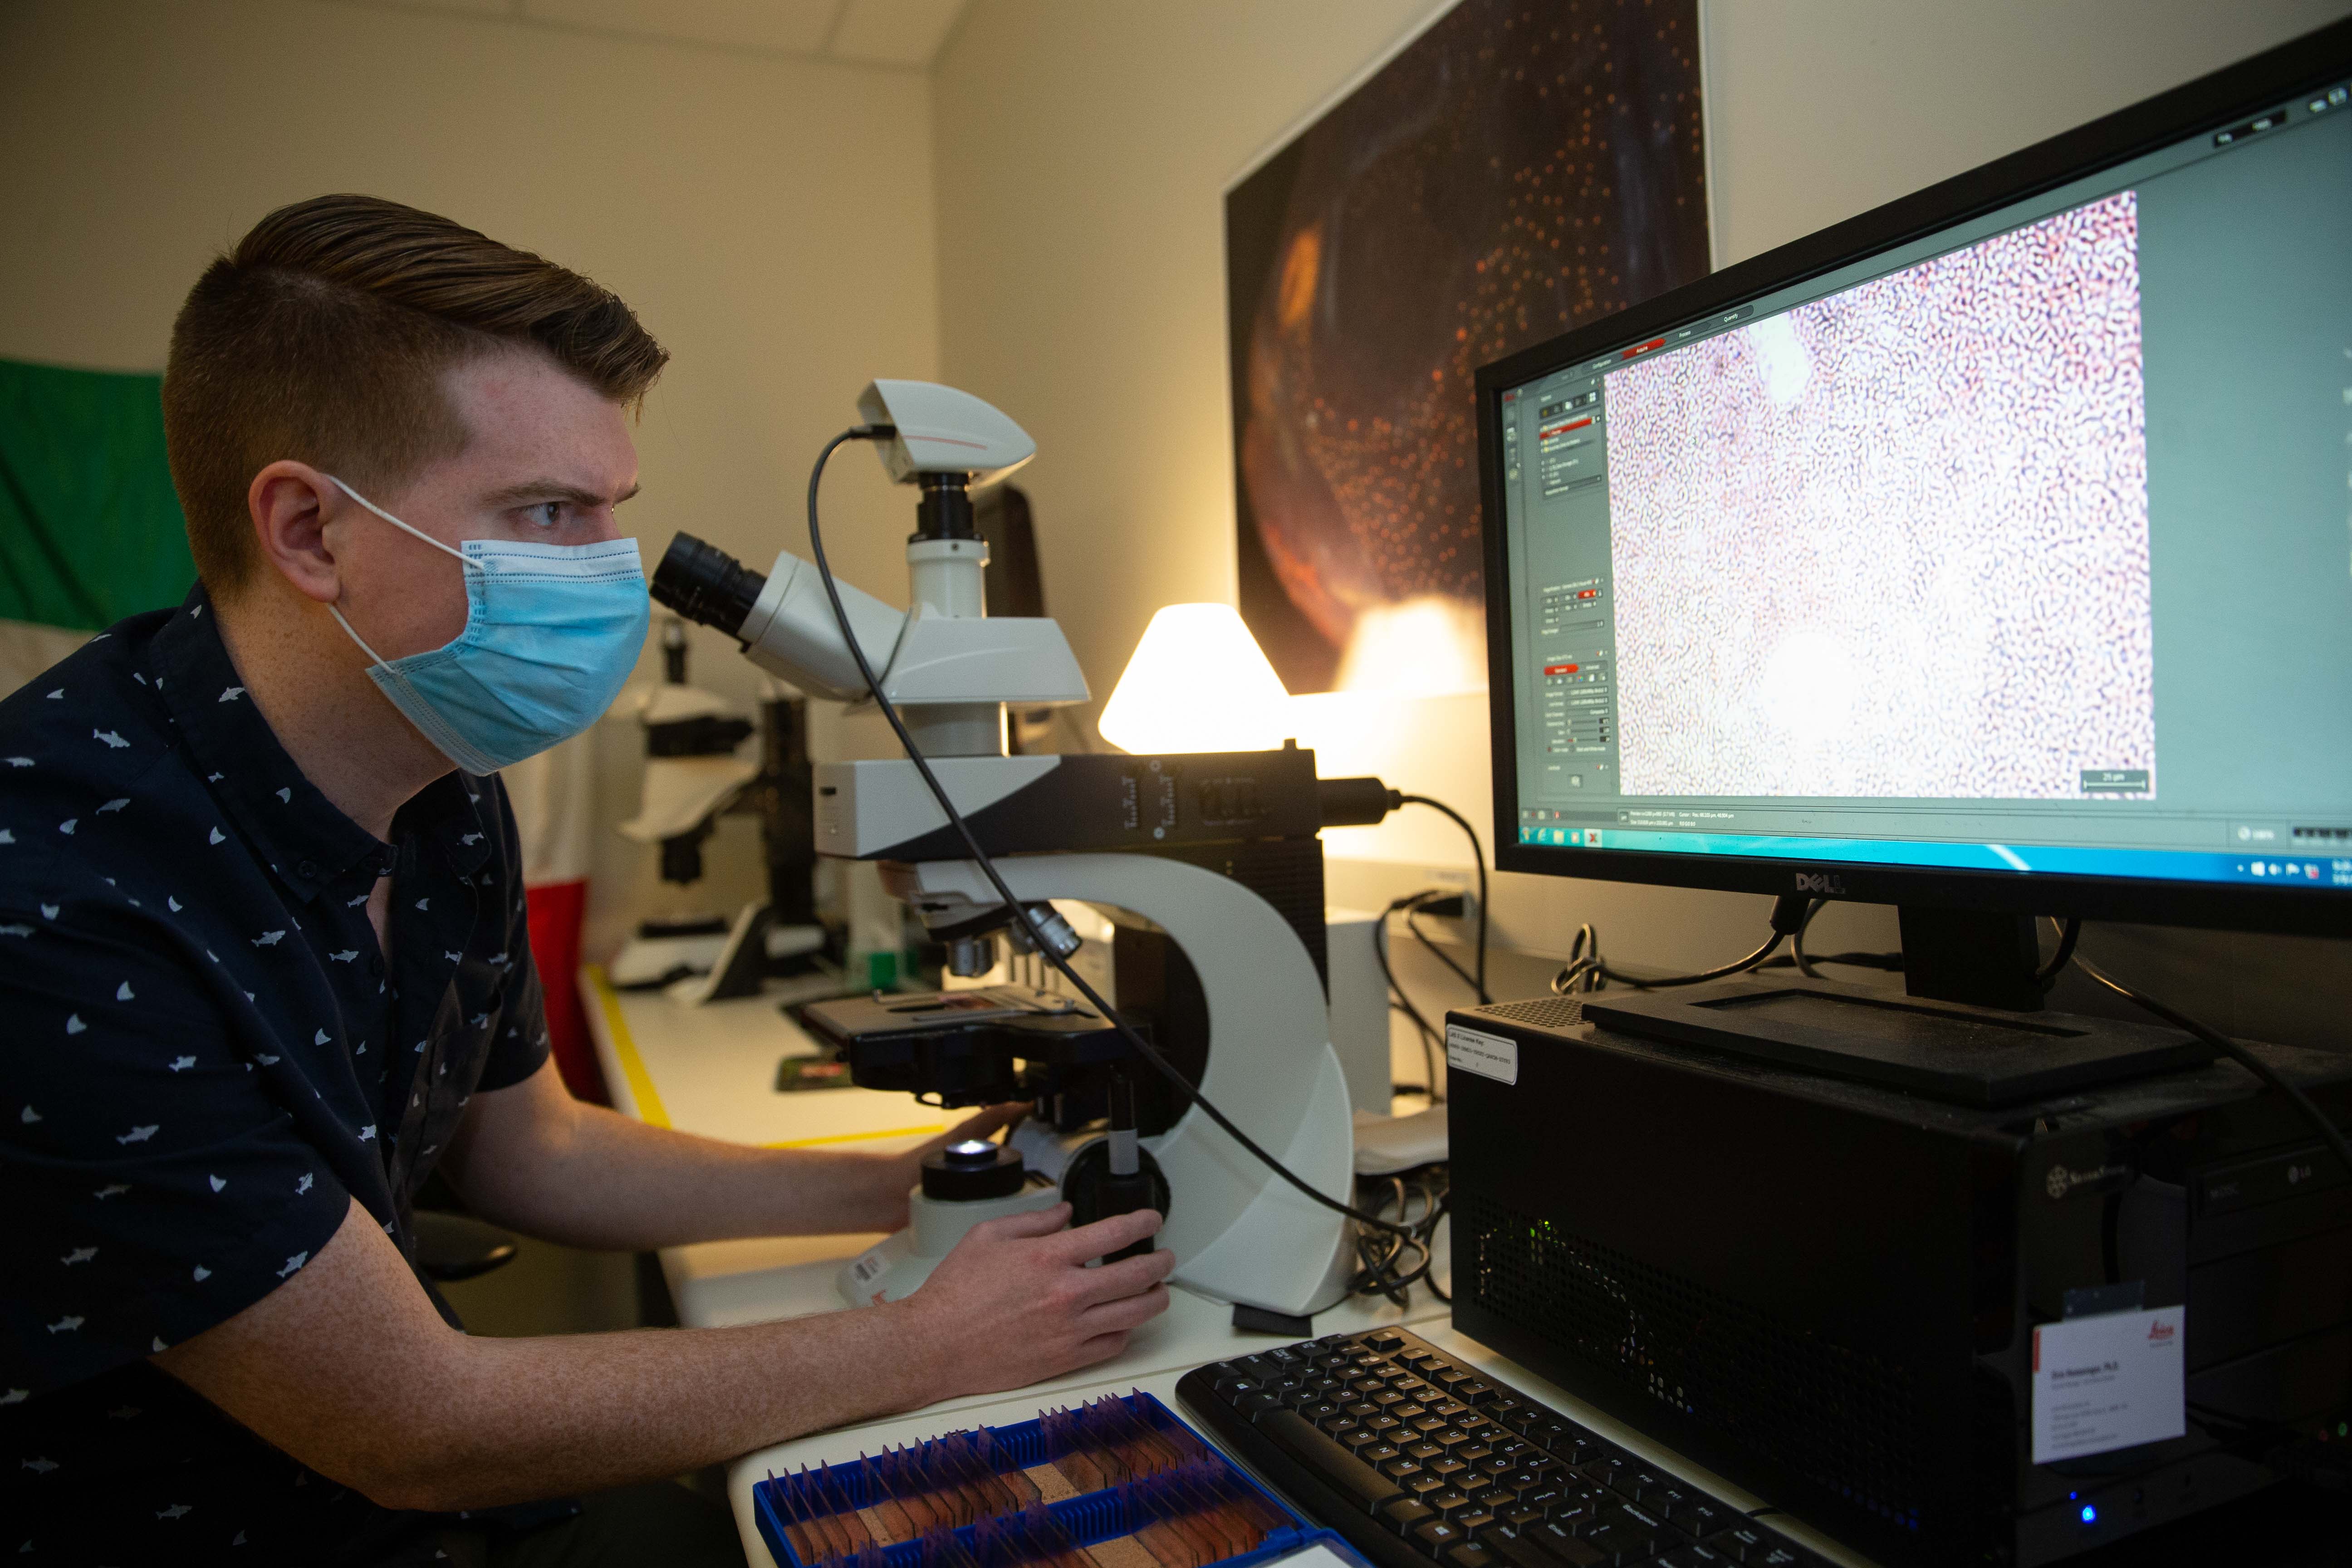 UC student Tyler Boggs and UC associate professor Joshua Gross, shown here in their lab, have new studies coming out on Mexican blind cave fish.